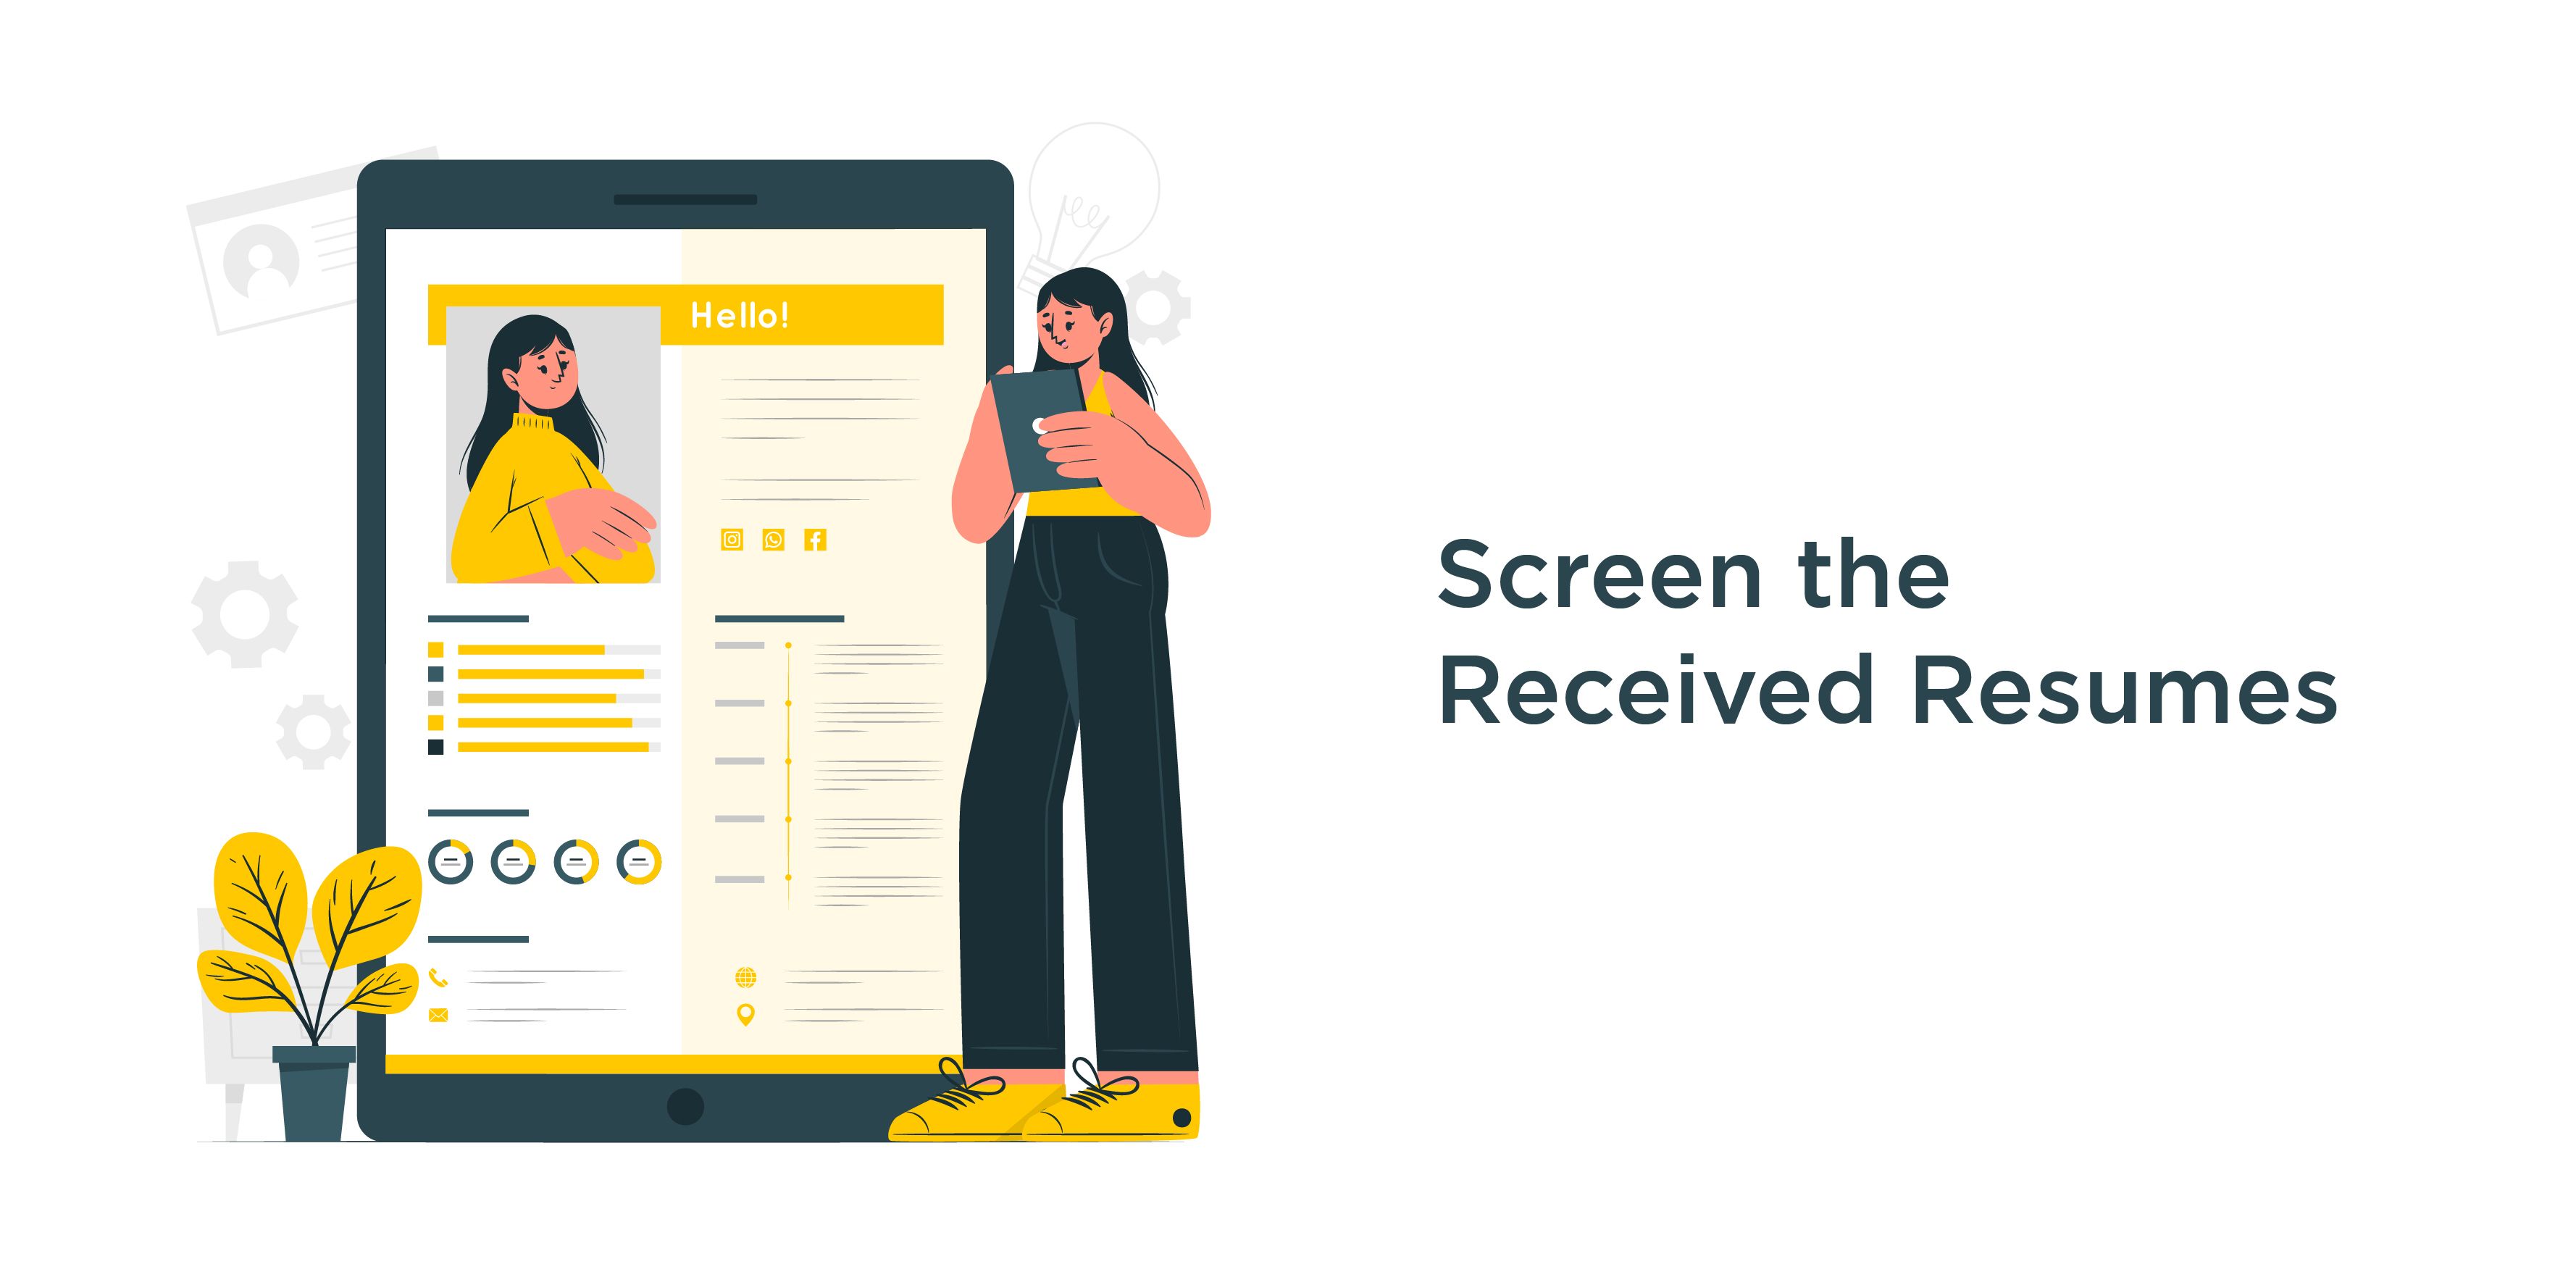 Screen the Received Resumes